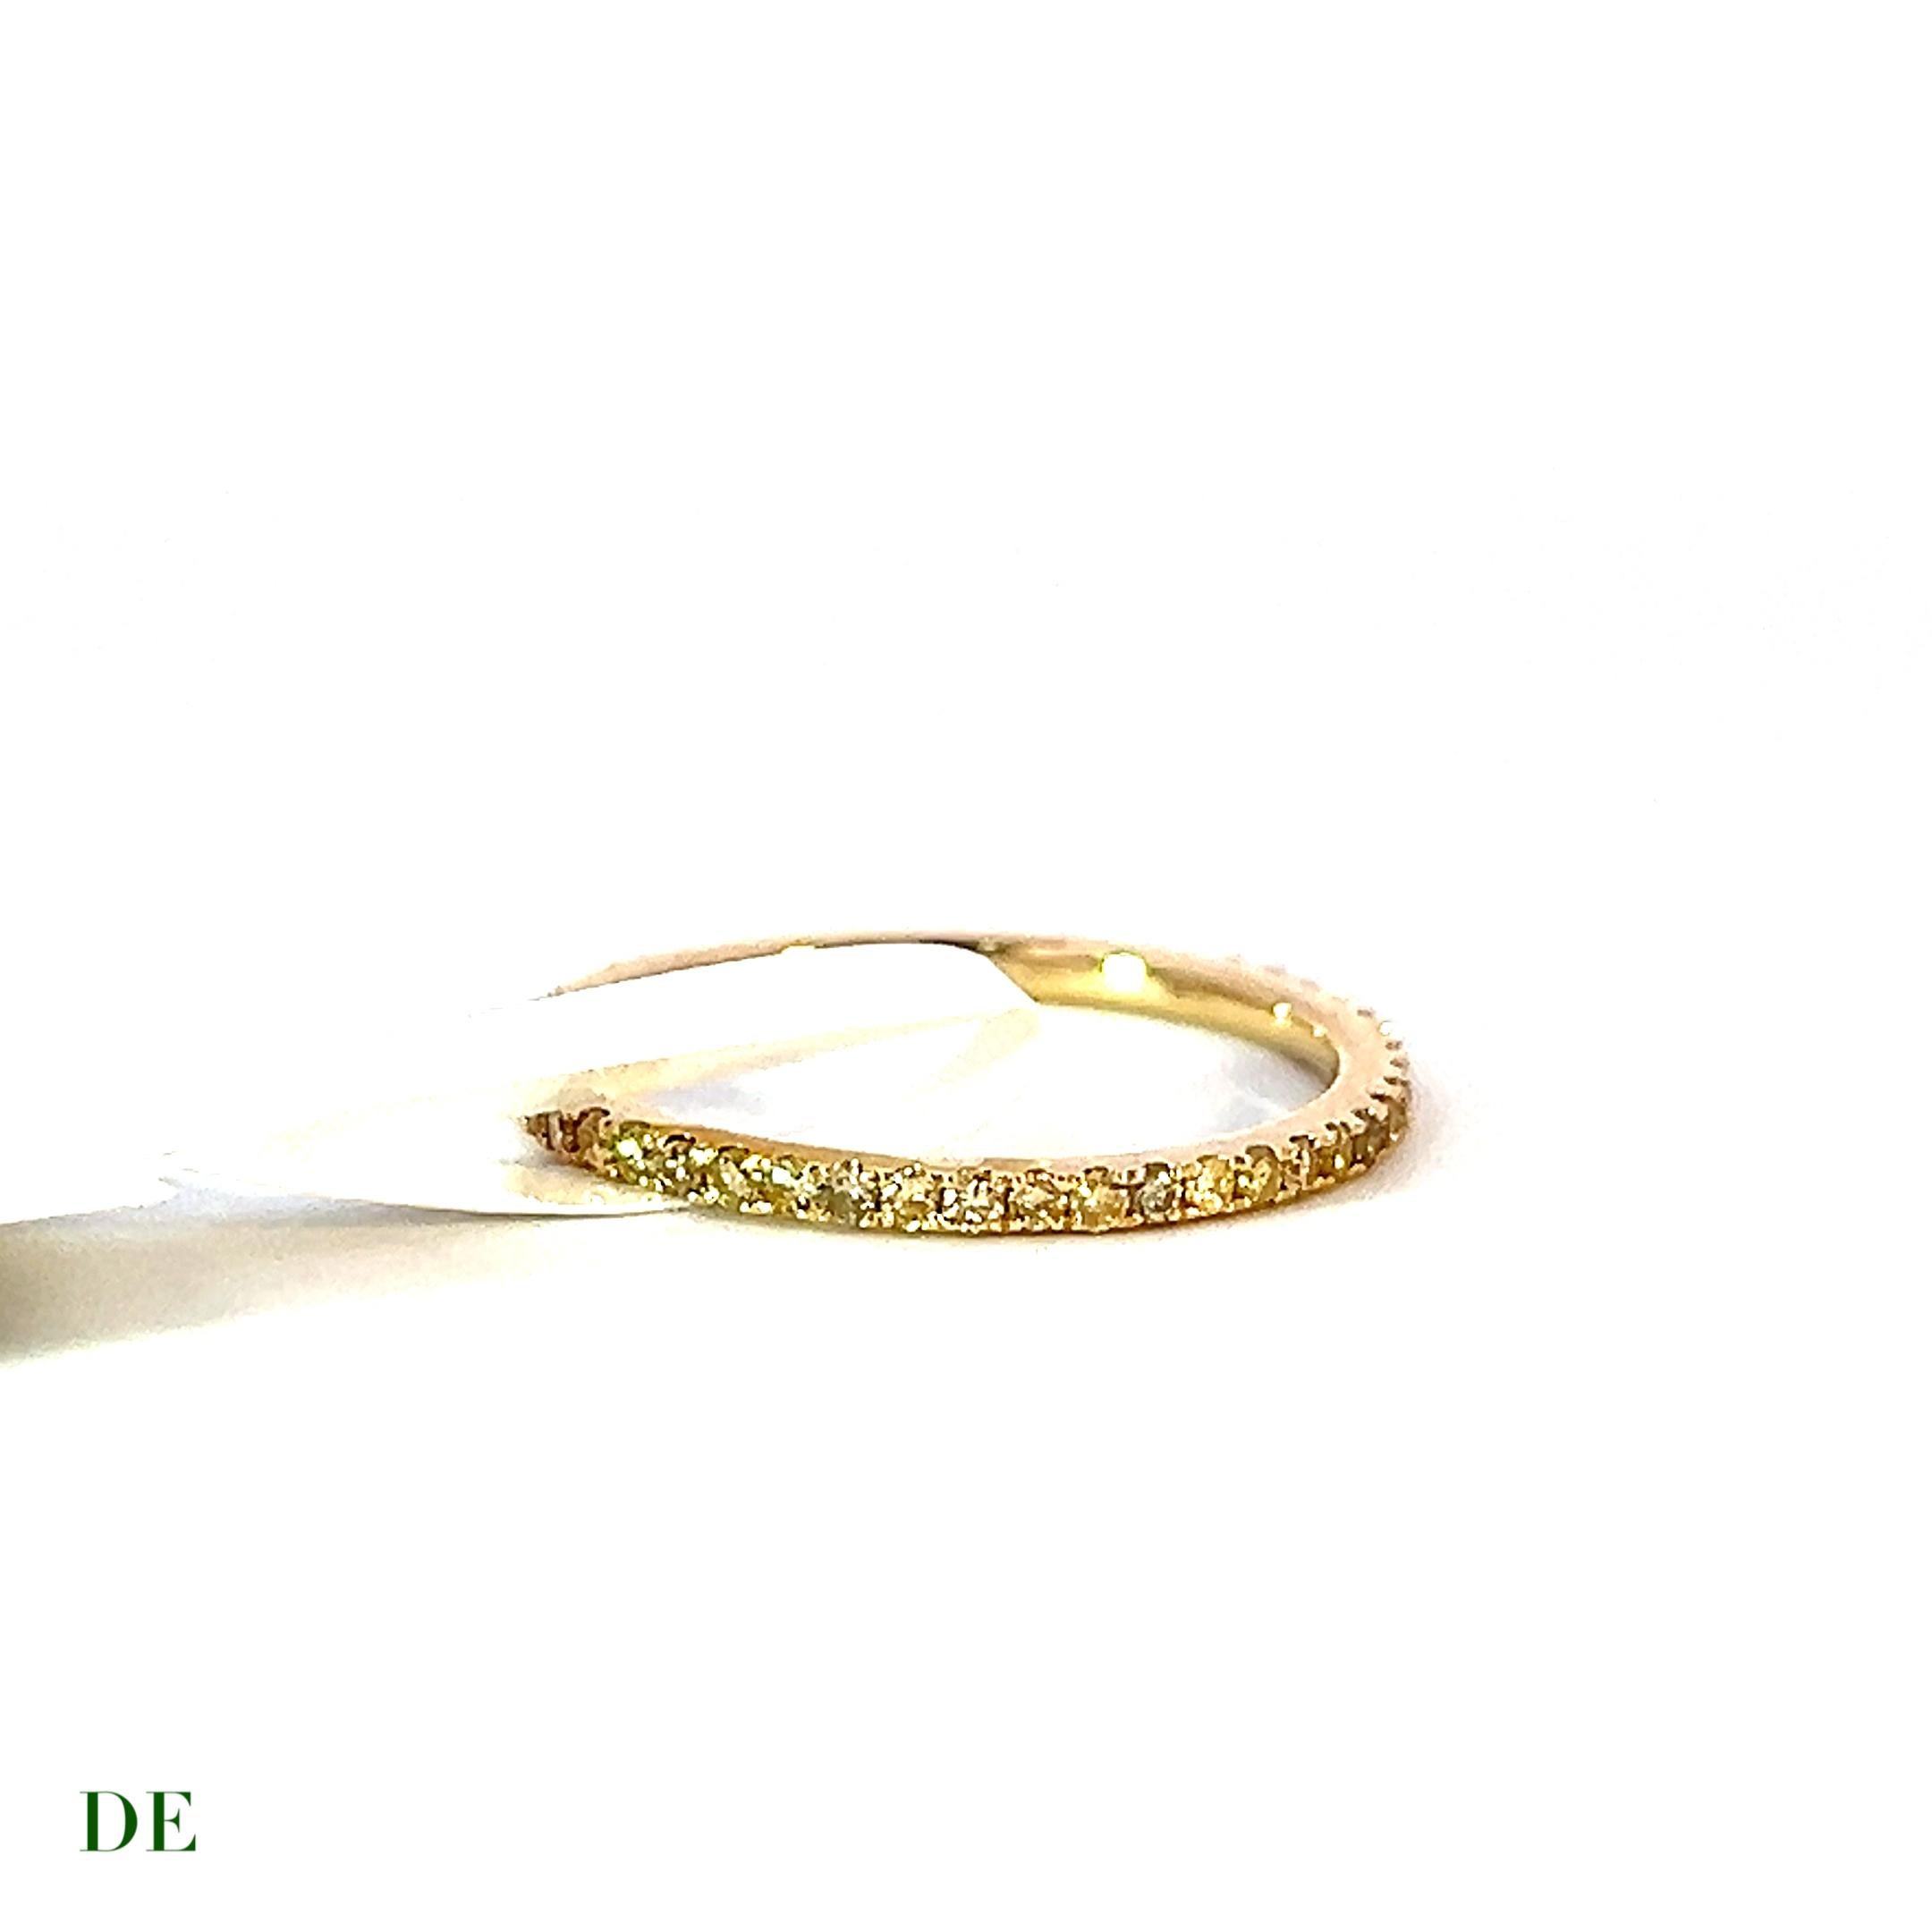 Classic 14k Yellow Gold .42 Carat Round Golden Diamond Eternity Band Ring

Introducing the Classic 14k Yellow Gold Round Golden Diamond Eternity Band Ring, a timeless piece that embodies elegance and sophistication. This exquisite ring features a